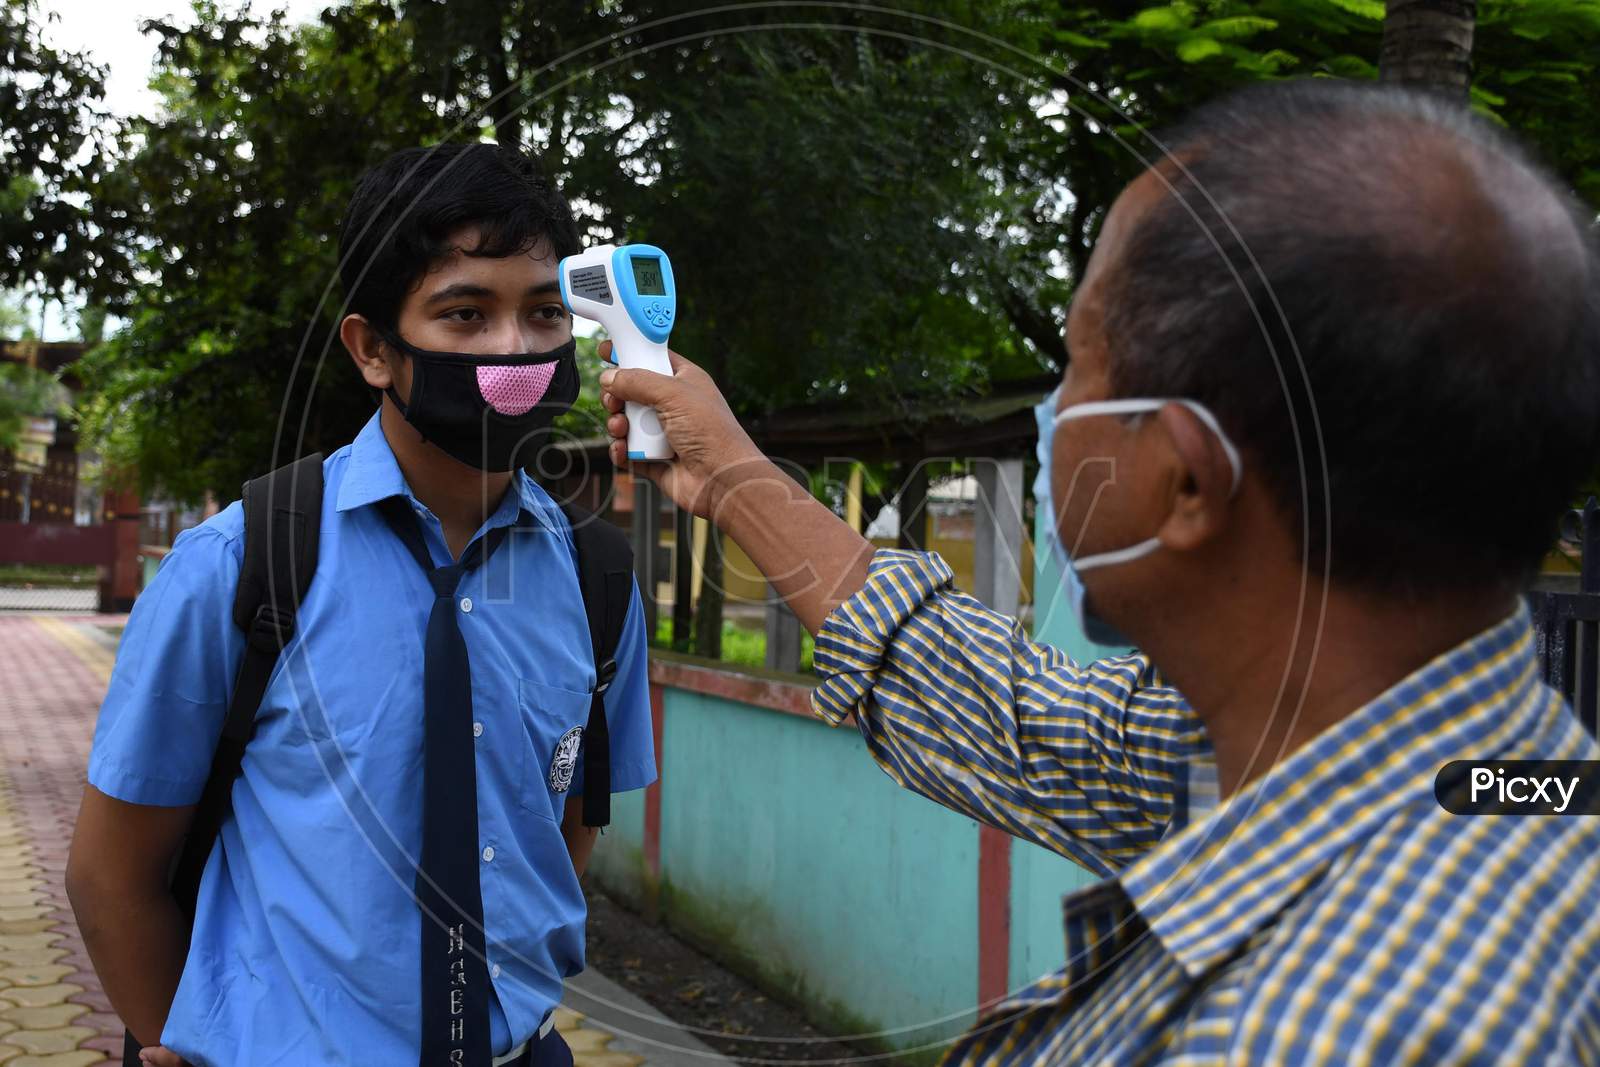 A student  gets his  body temperature checked at the entrance gate of a school as schools reopened after more than 5-months closure due to the Covid-19 coronavirus pandemic in  Nagaon District of Assam on  sep 21,2020.